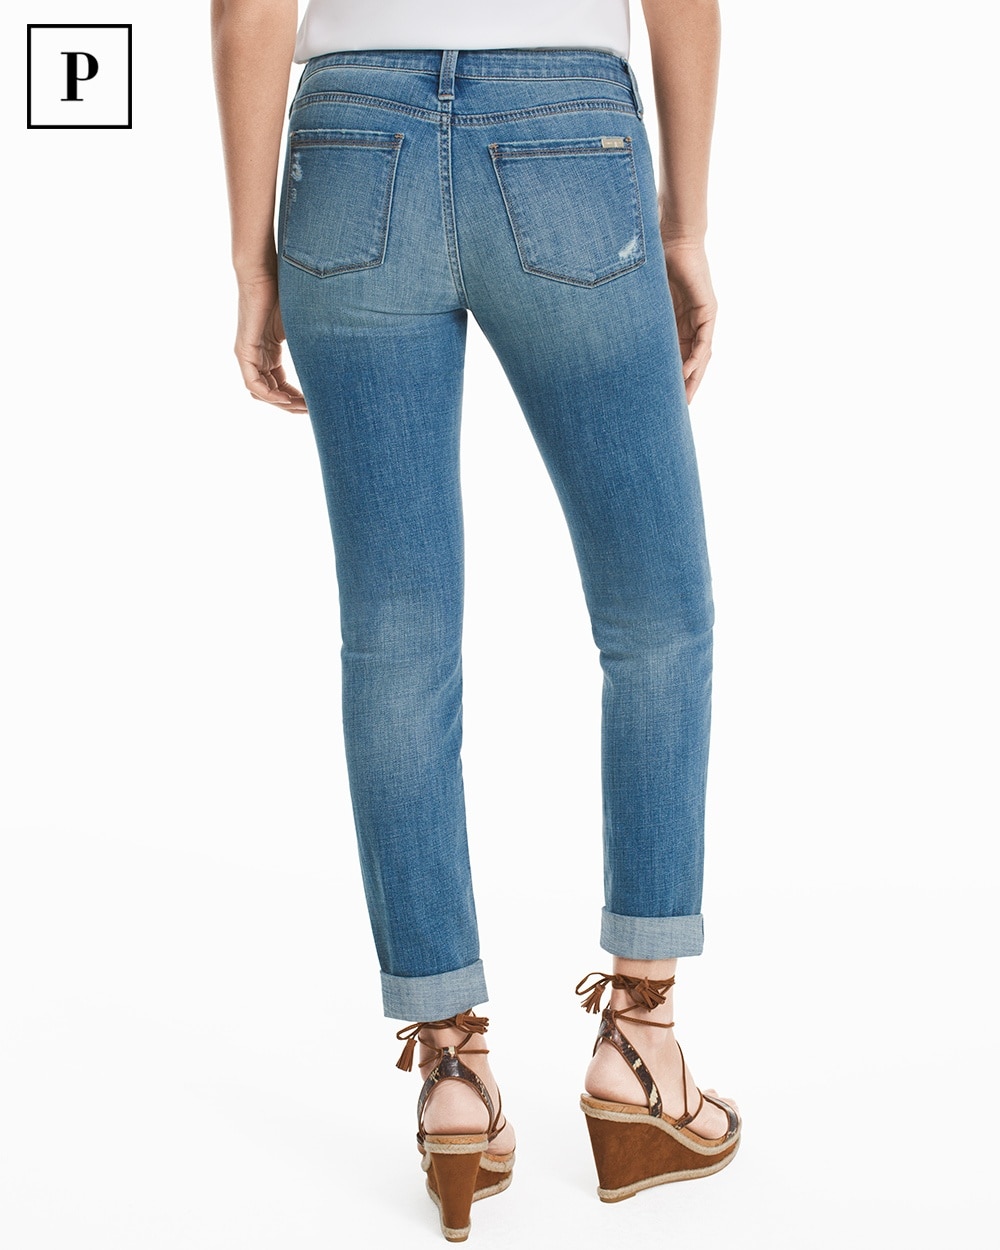 Petite Embroidered Girlfriend Jeans - WHBM